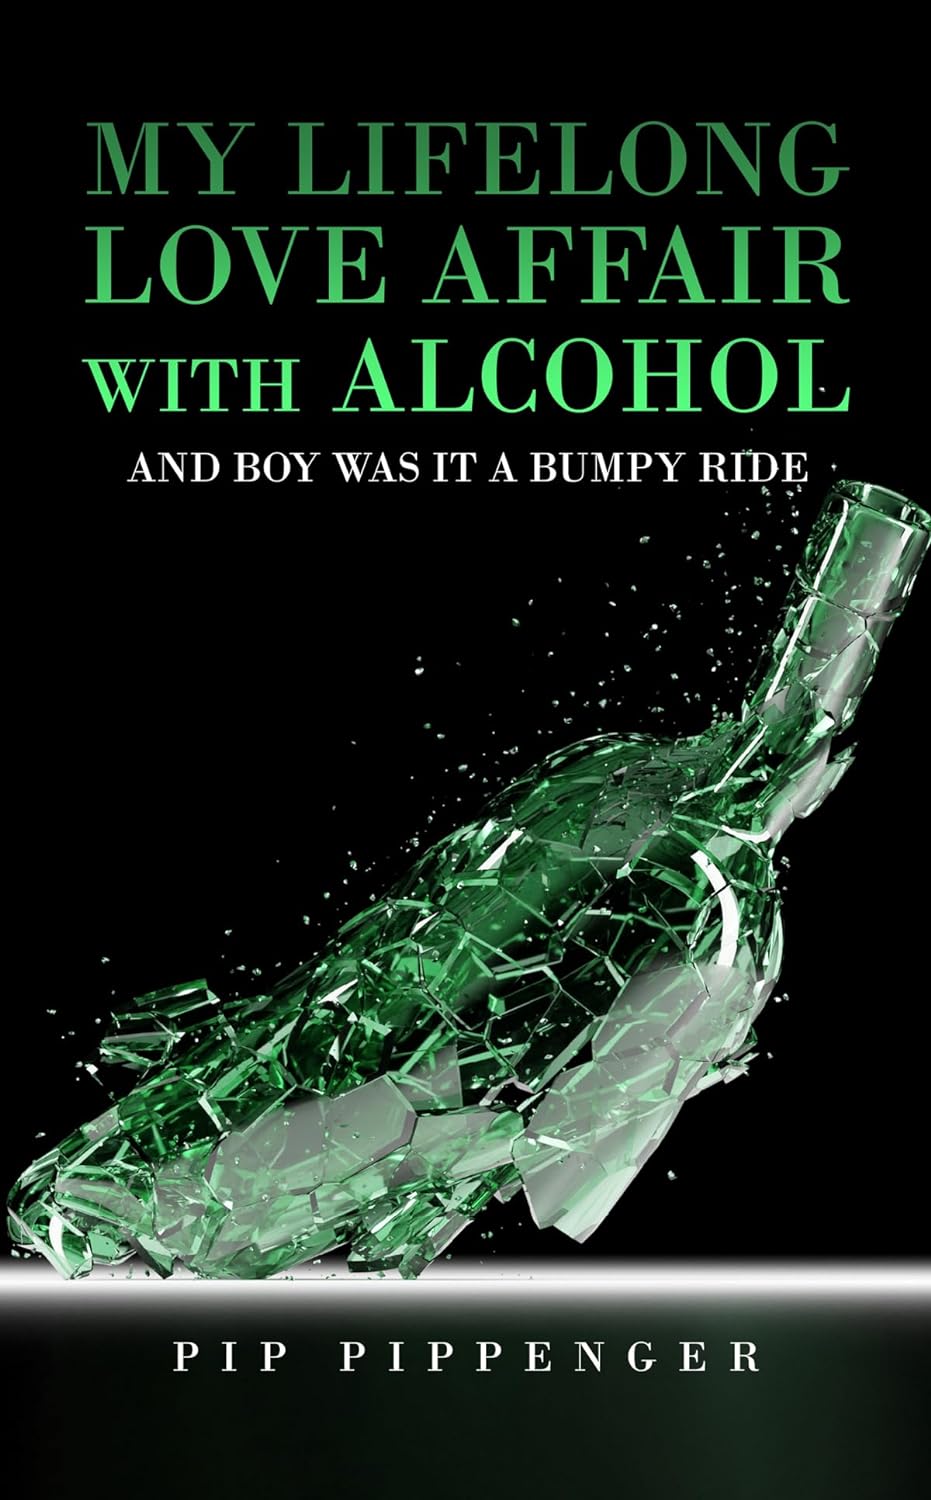 New Memoir Explores Life’s Triumphs and Trials: "My Lifelong Love Affair With Alcohol: And Boy Was It a Bumpy Ride" by Pip Pippenger